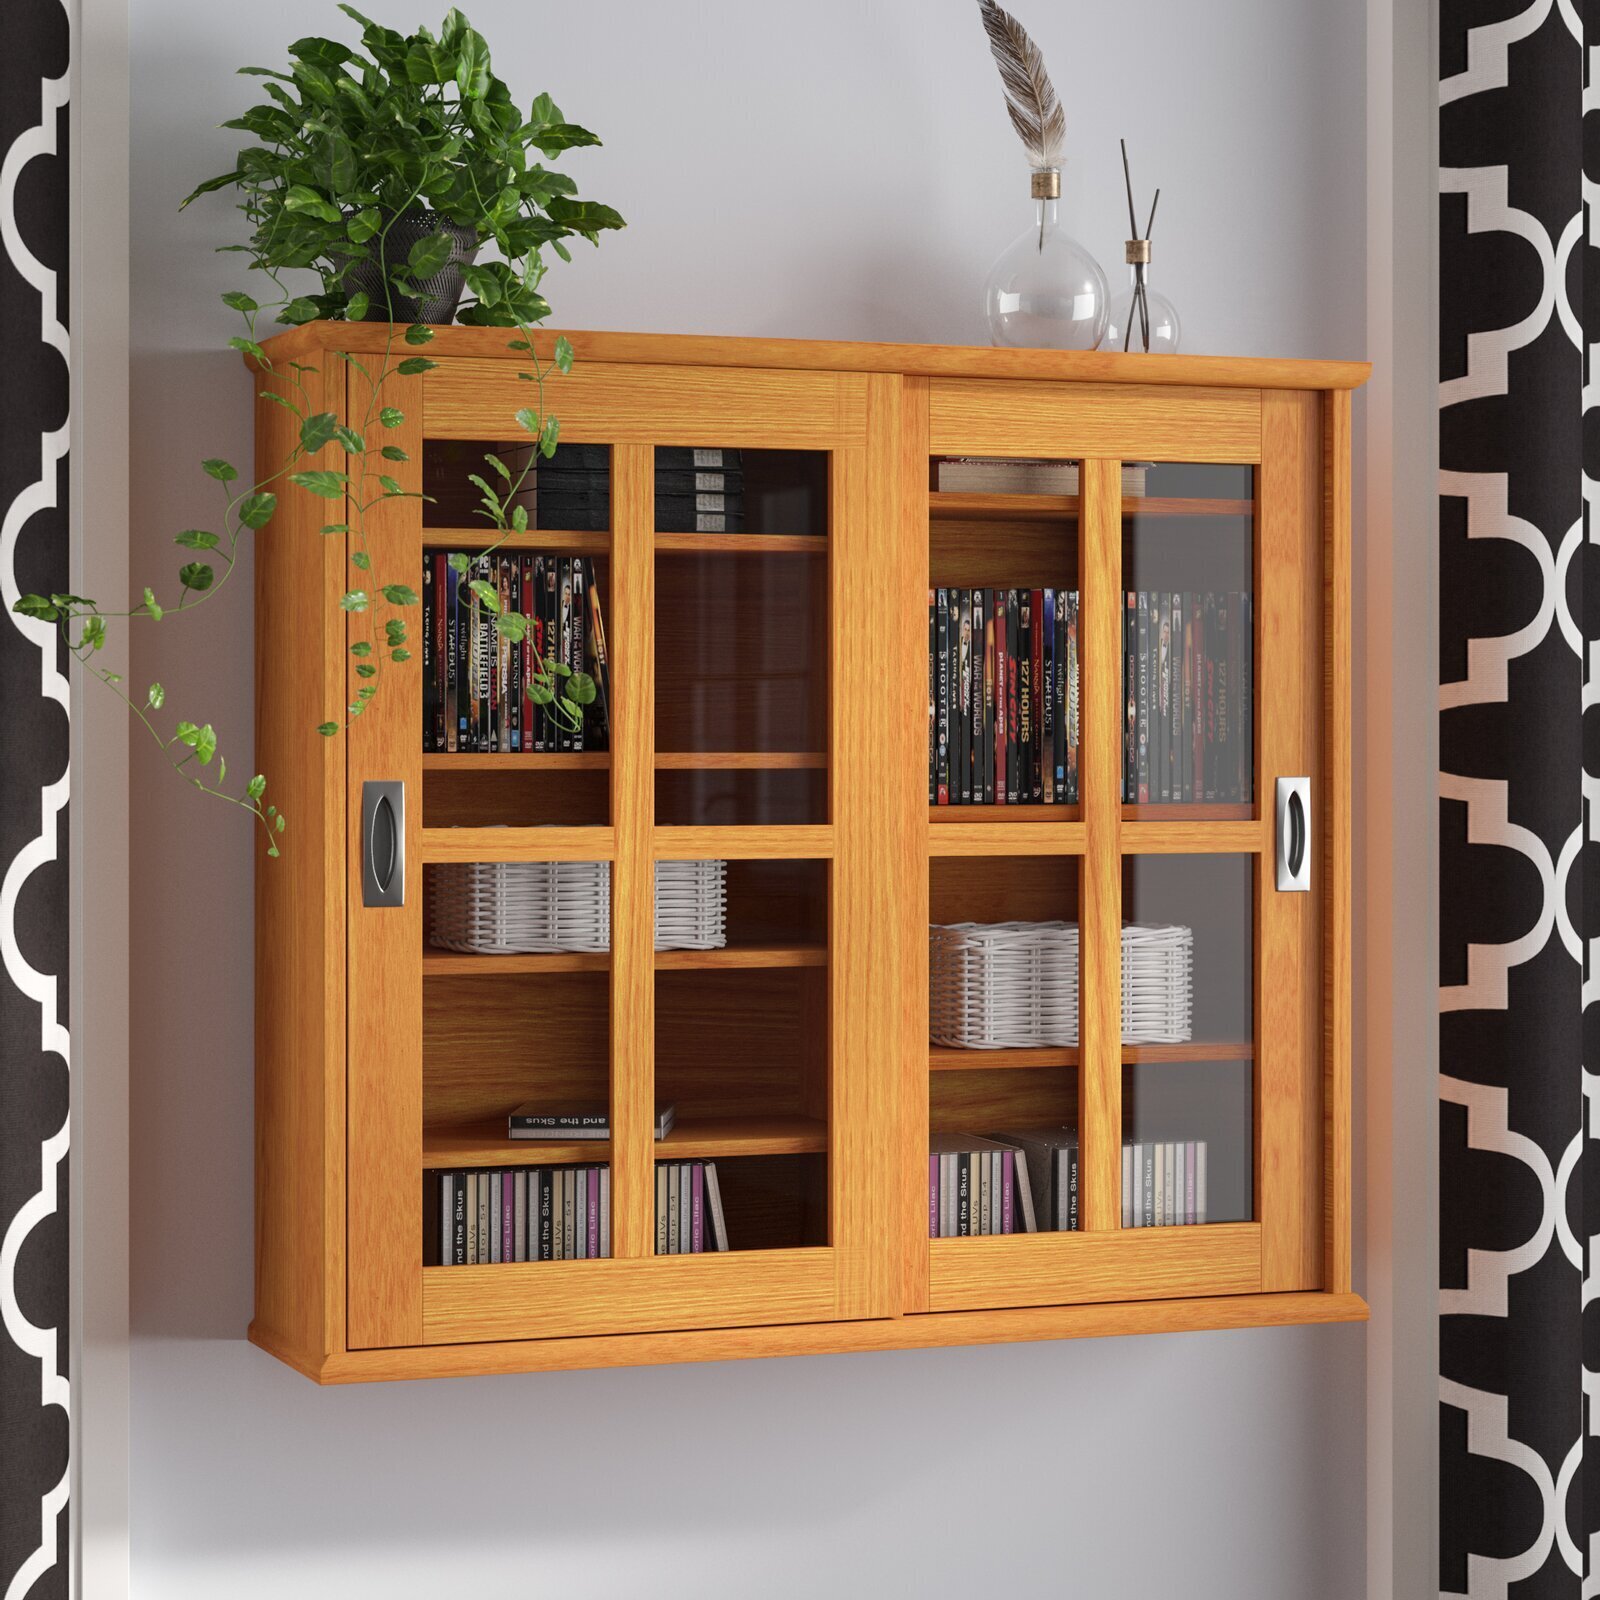 Wall Mounted Dvd Storage - Ideas On Foter